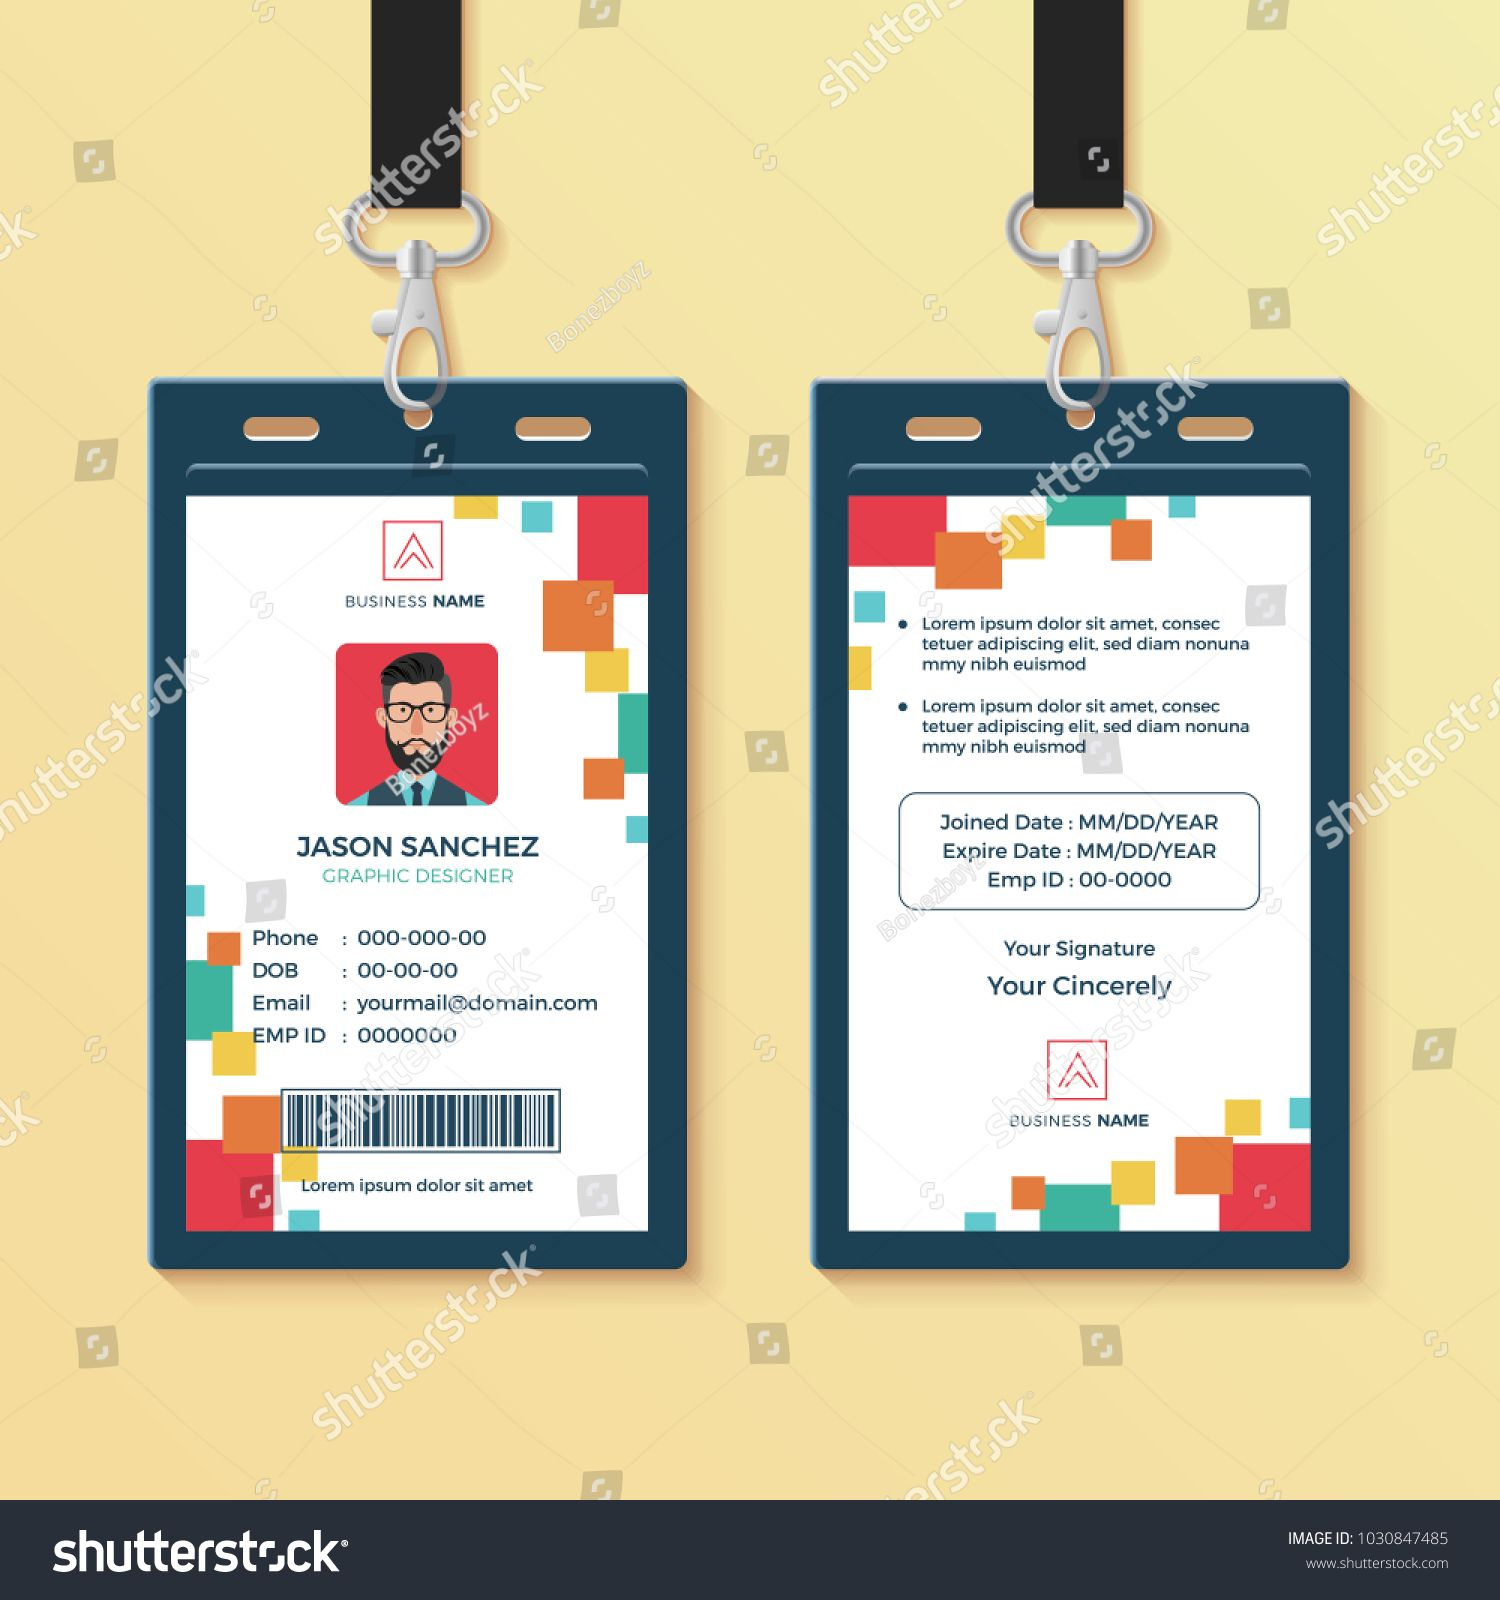 Creative Id Card Template, Perfect For Any Types Of Agency Intended For Media Id Card Templates